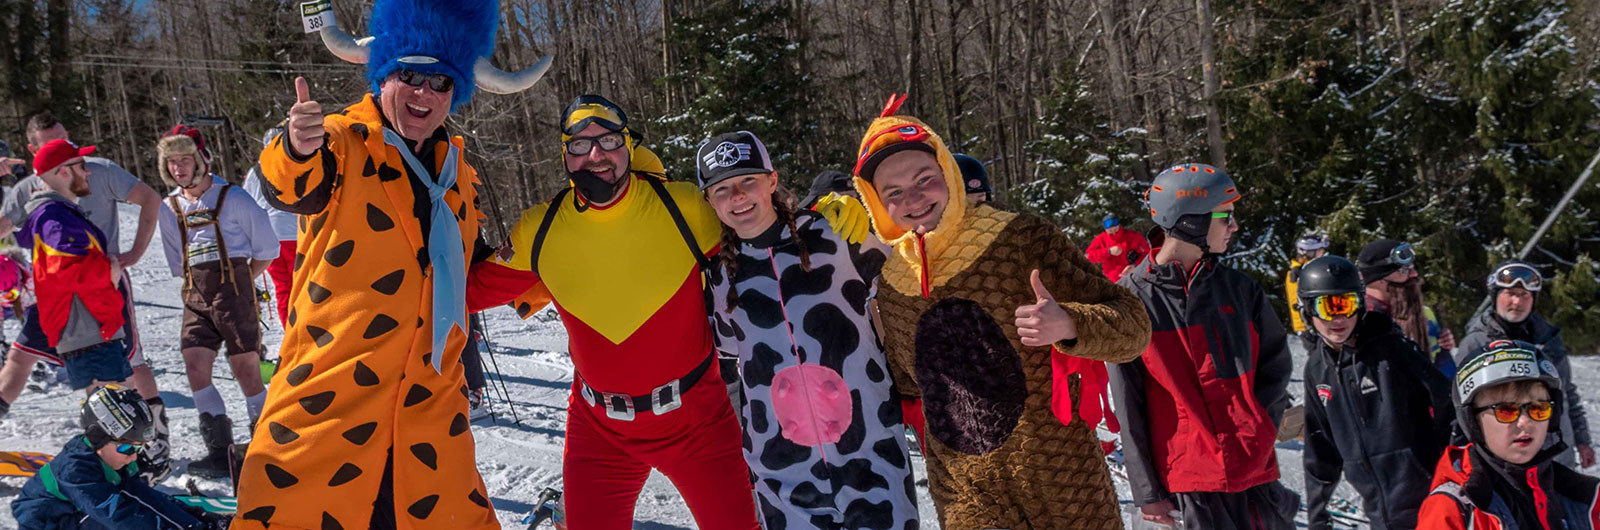 Costumed skiers getting ready for Pond Skimming